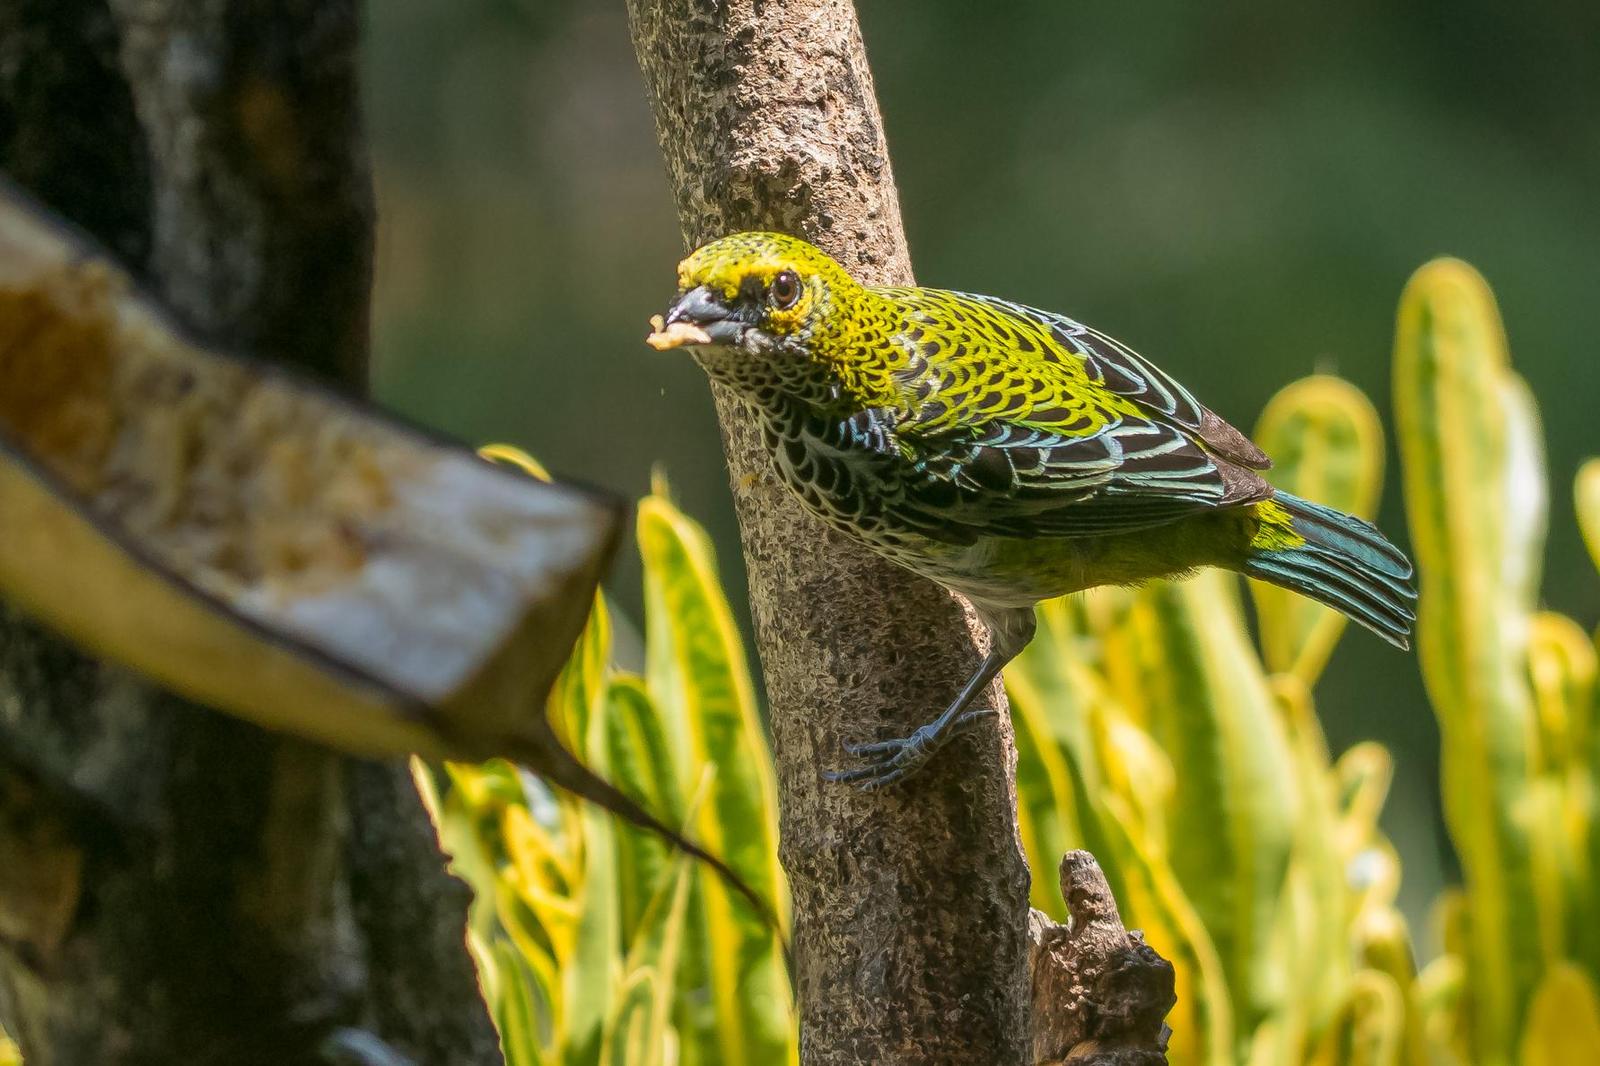 Speckled Tanager Photo by Gerald Hoekstra